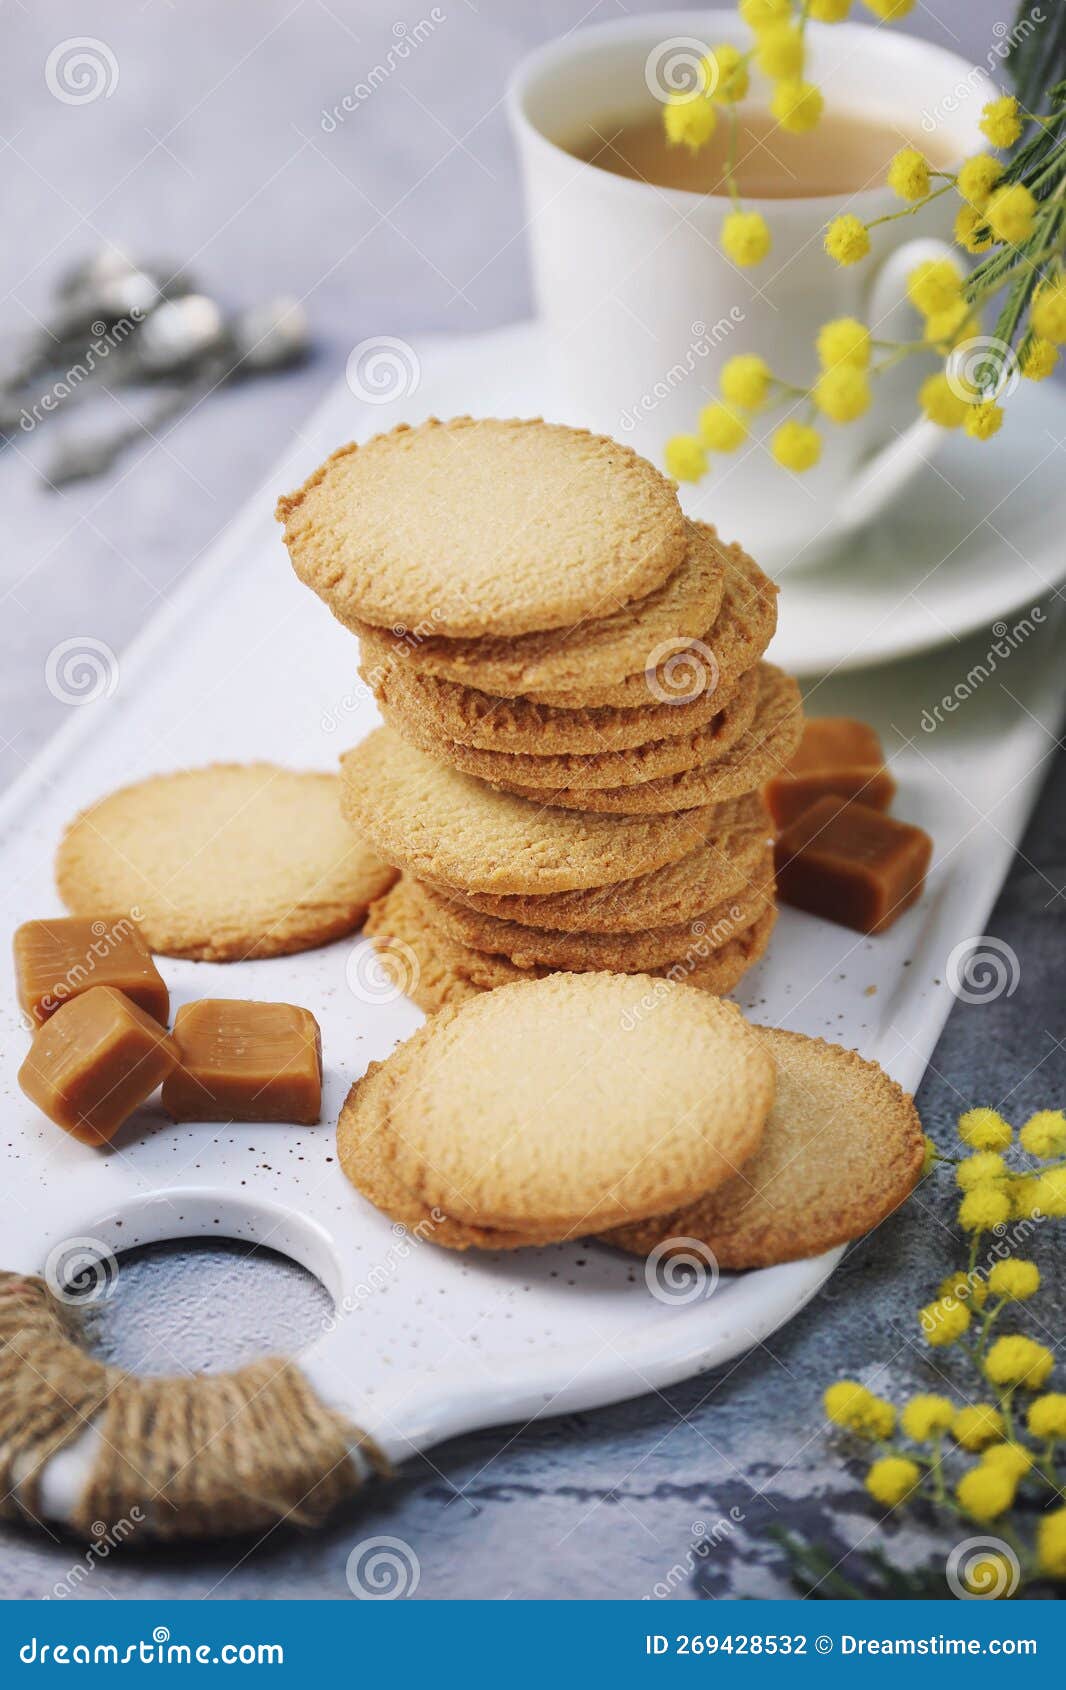 palets bretons, french cookies. salted caramel shortbread breton cookies, cup of coffee and bouquet of mimosa